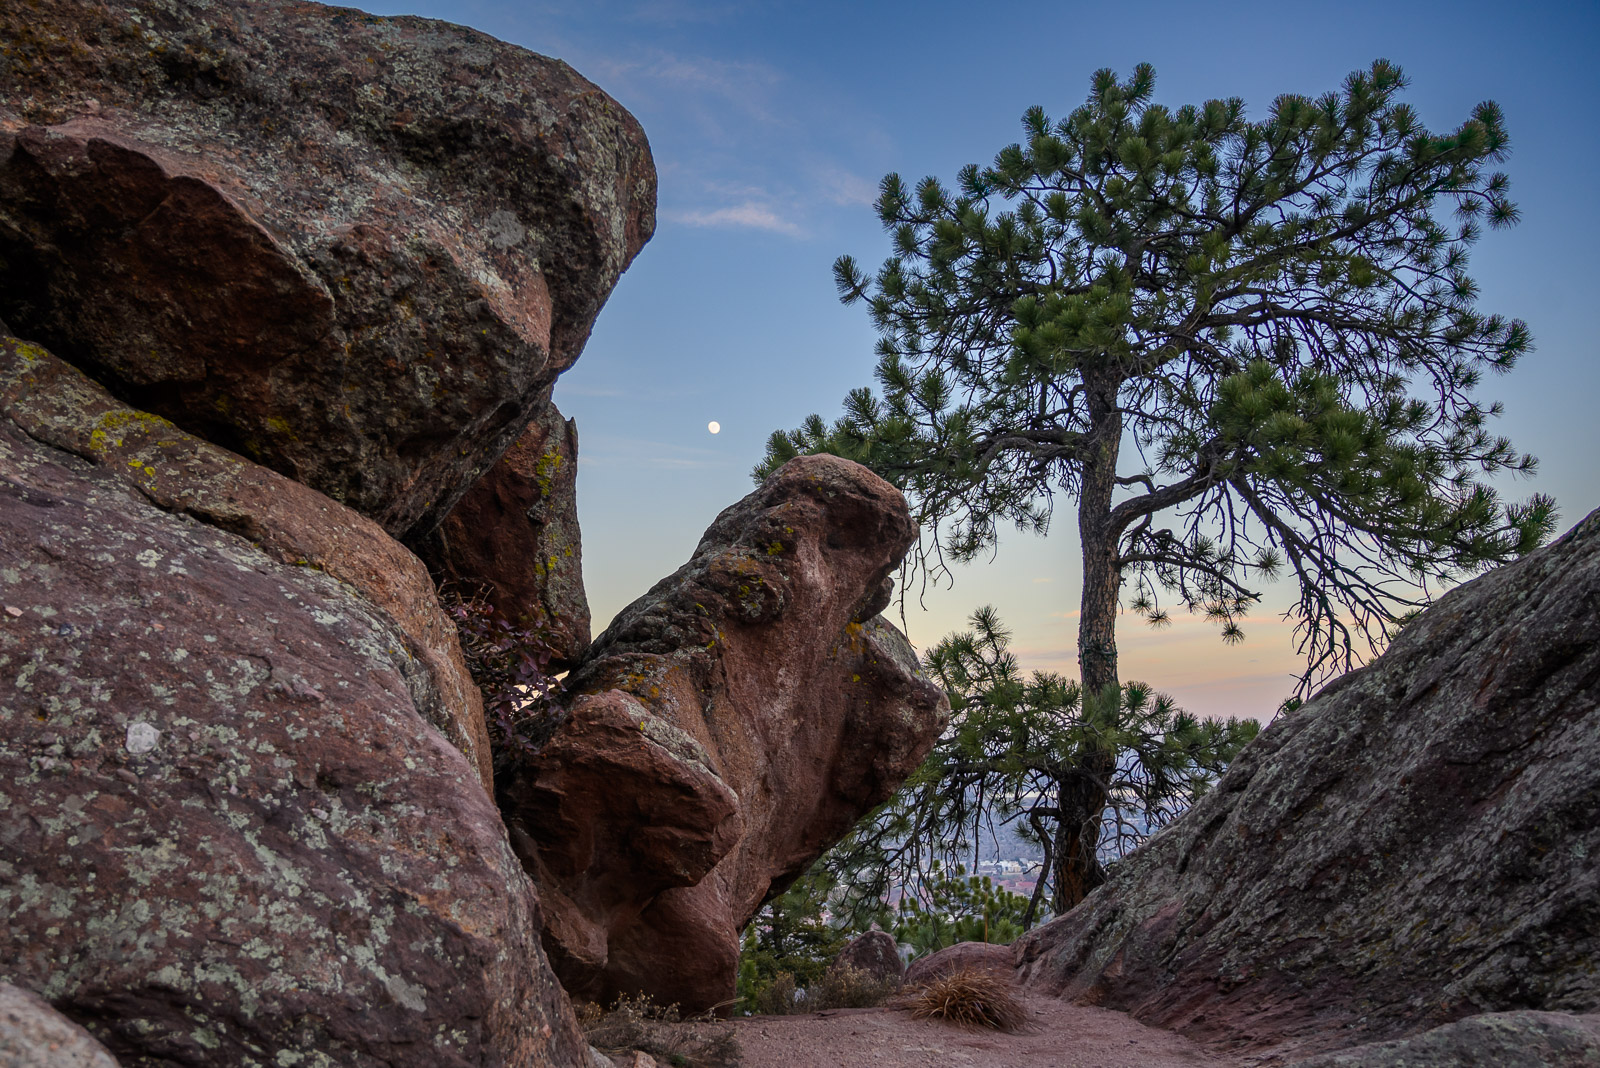 Huge red rocks covered with moss lean precariously on the edge of a mountain while the moon rises over Boulder, Colorado.